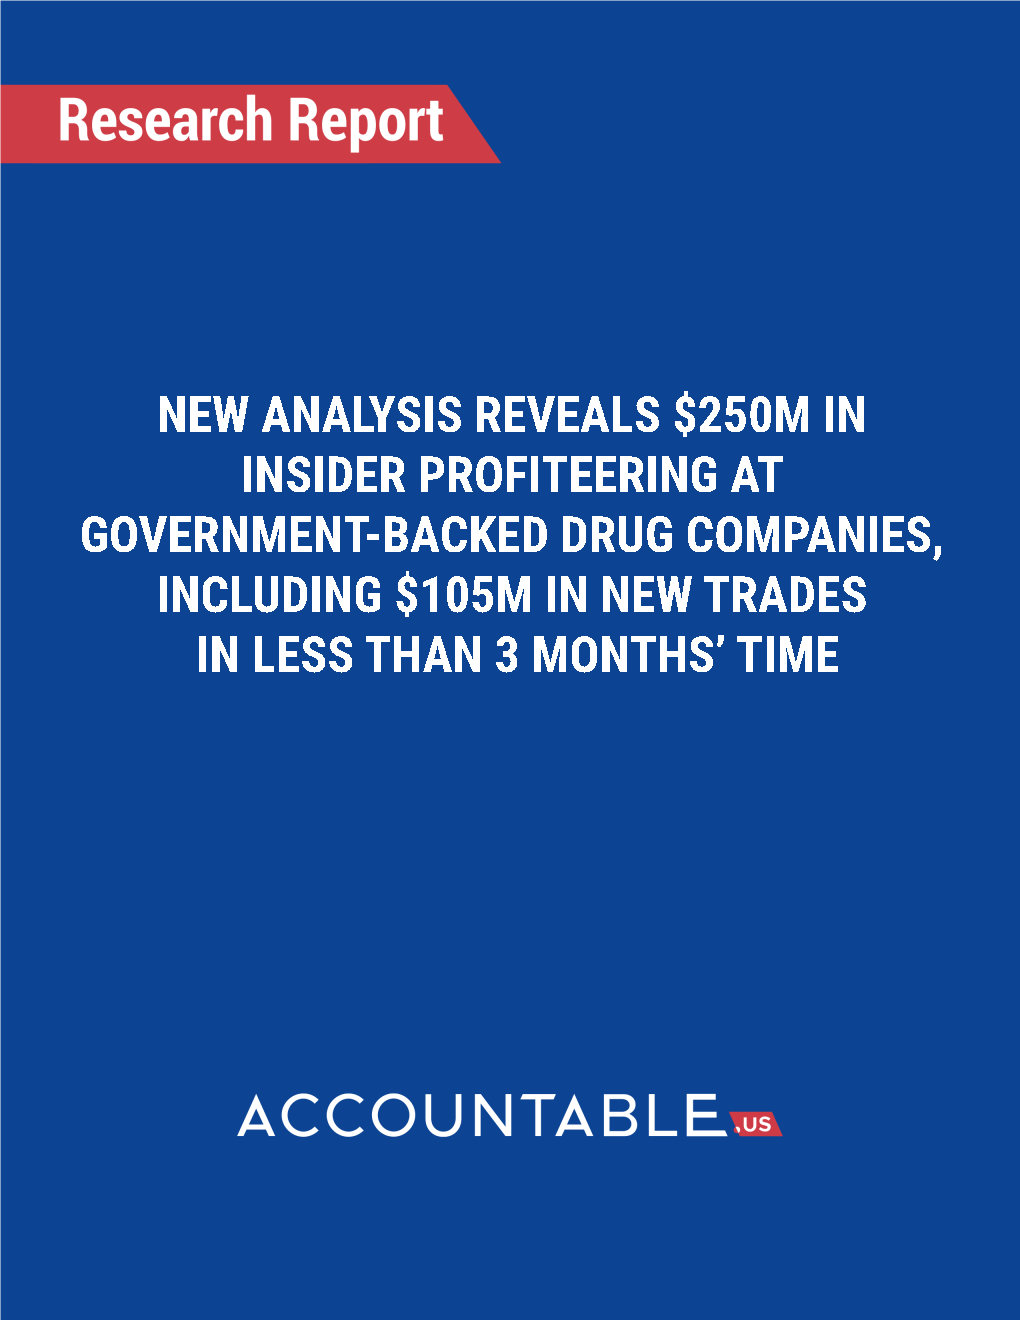 Report from Accountable.US